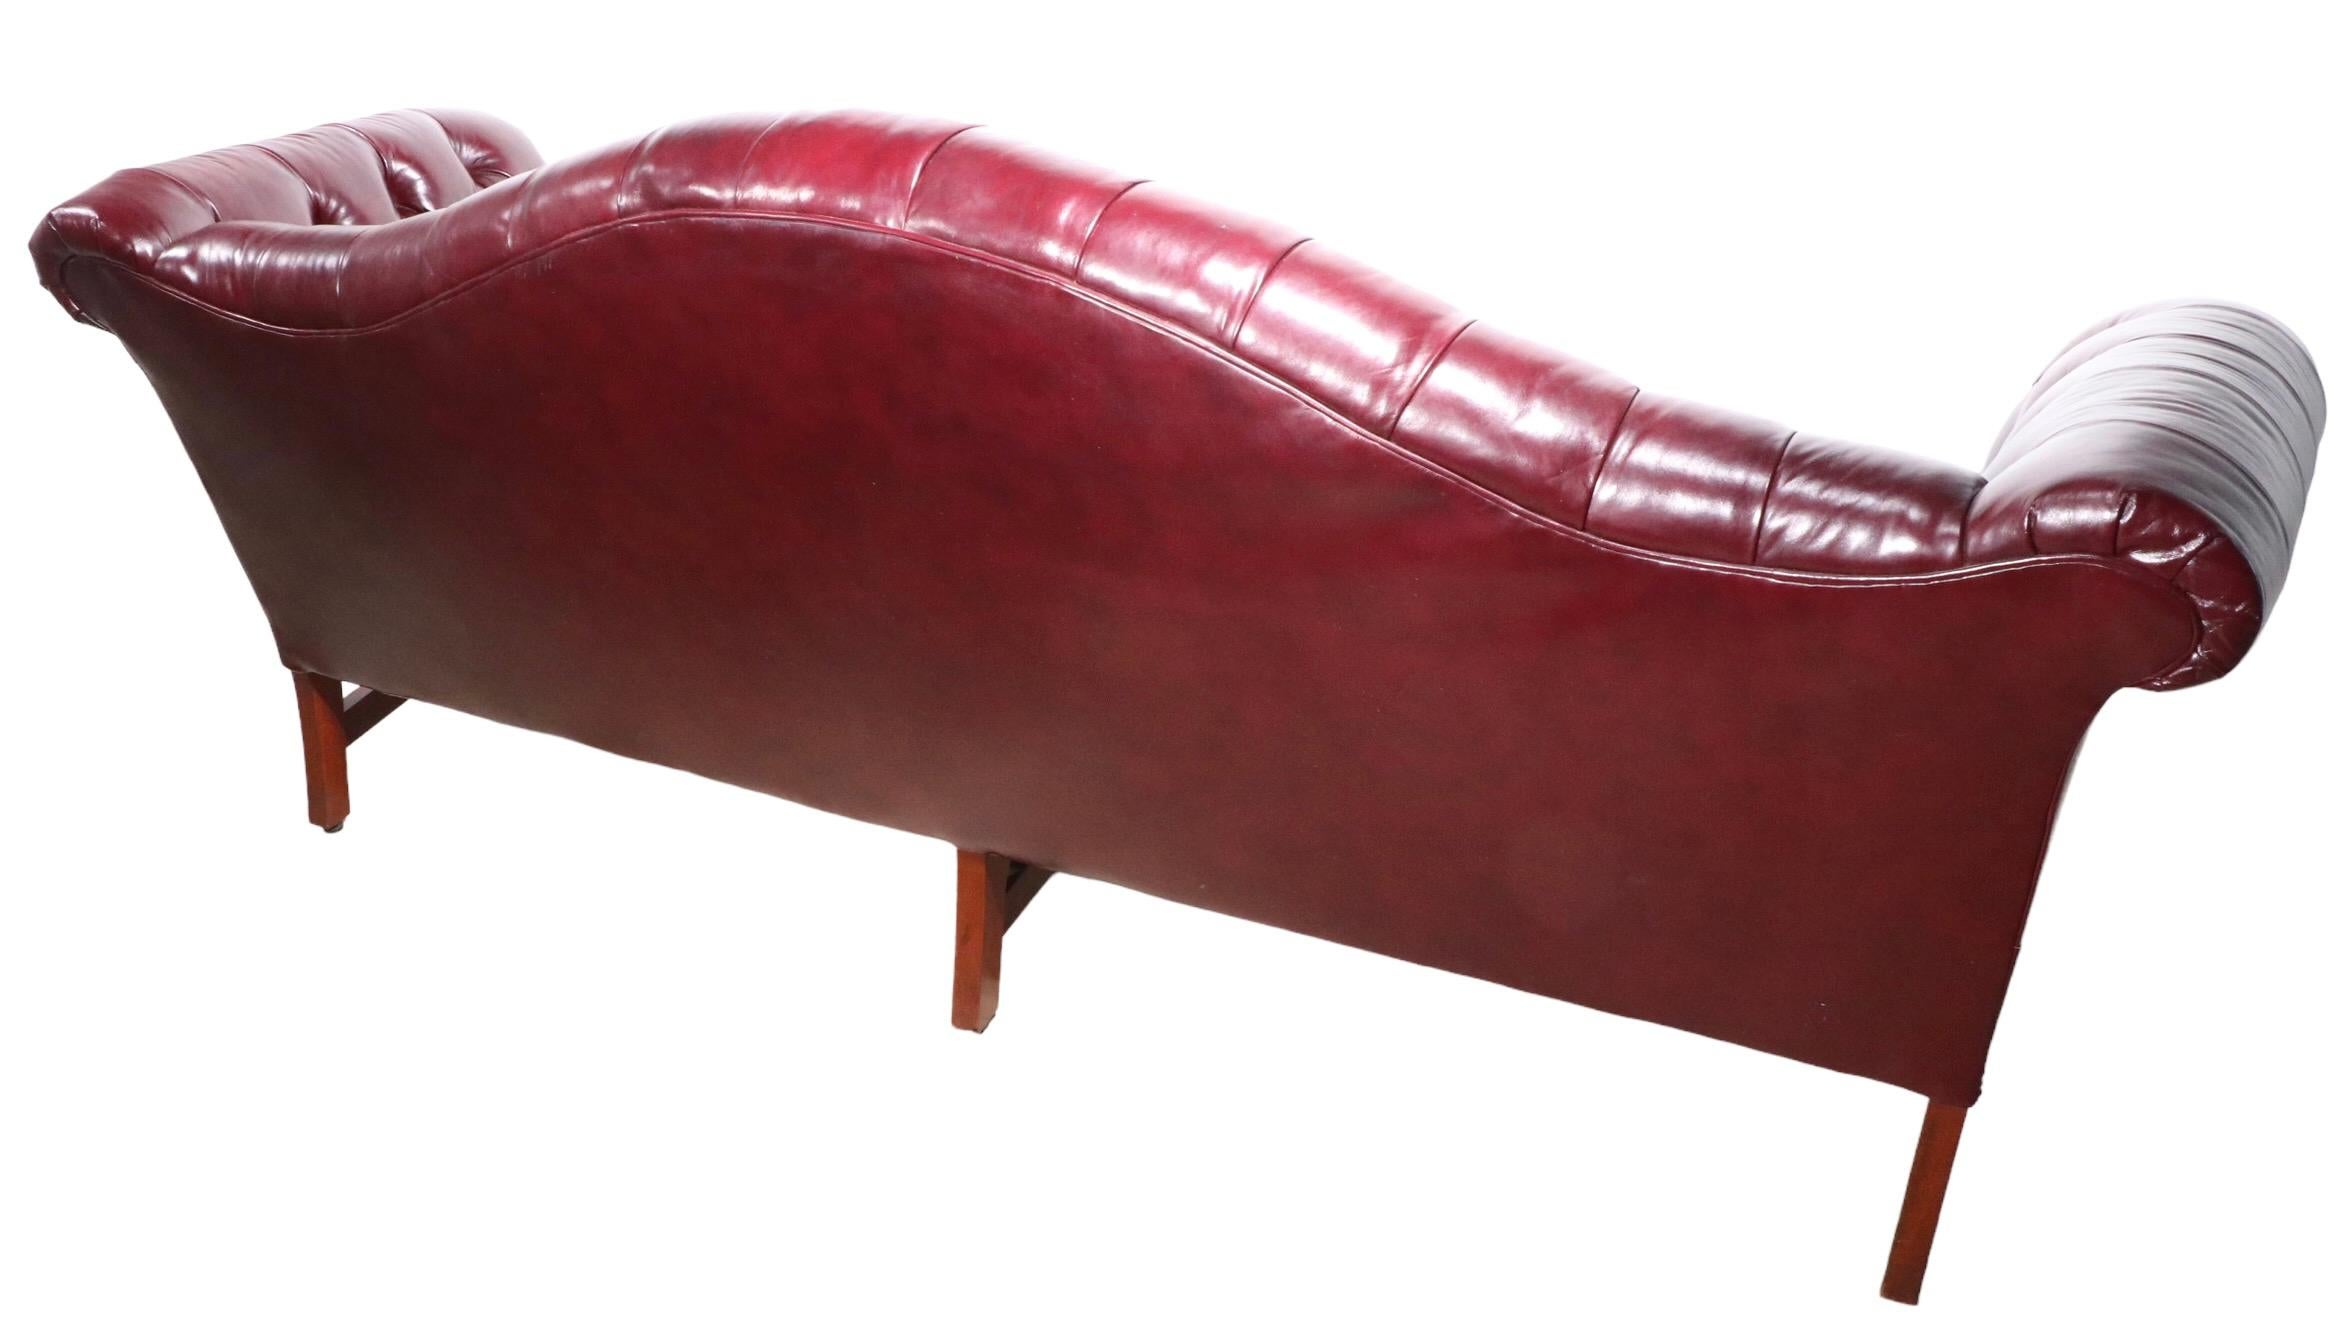  Tufted Burgundy  Leather Chesterfield Sofa c 1950/1960's For Sale 2